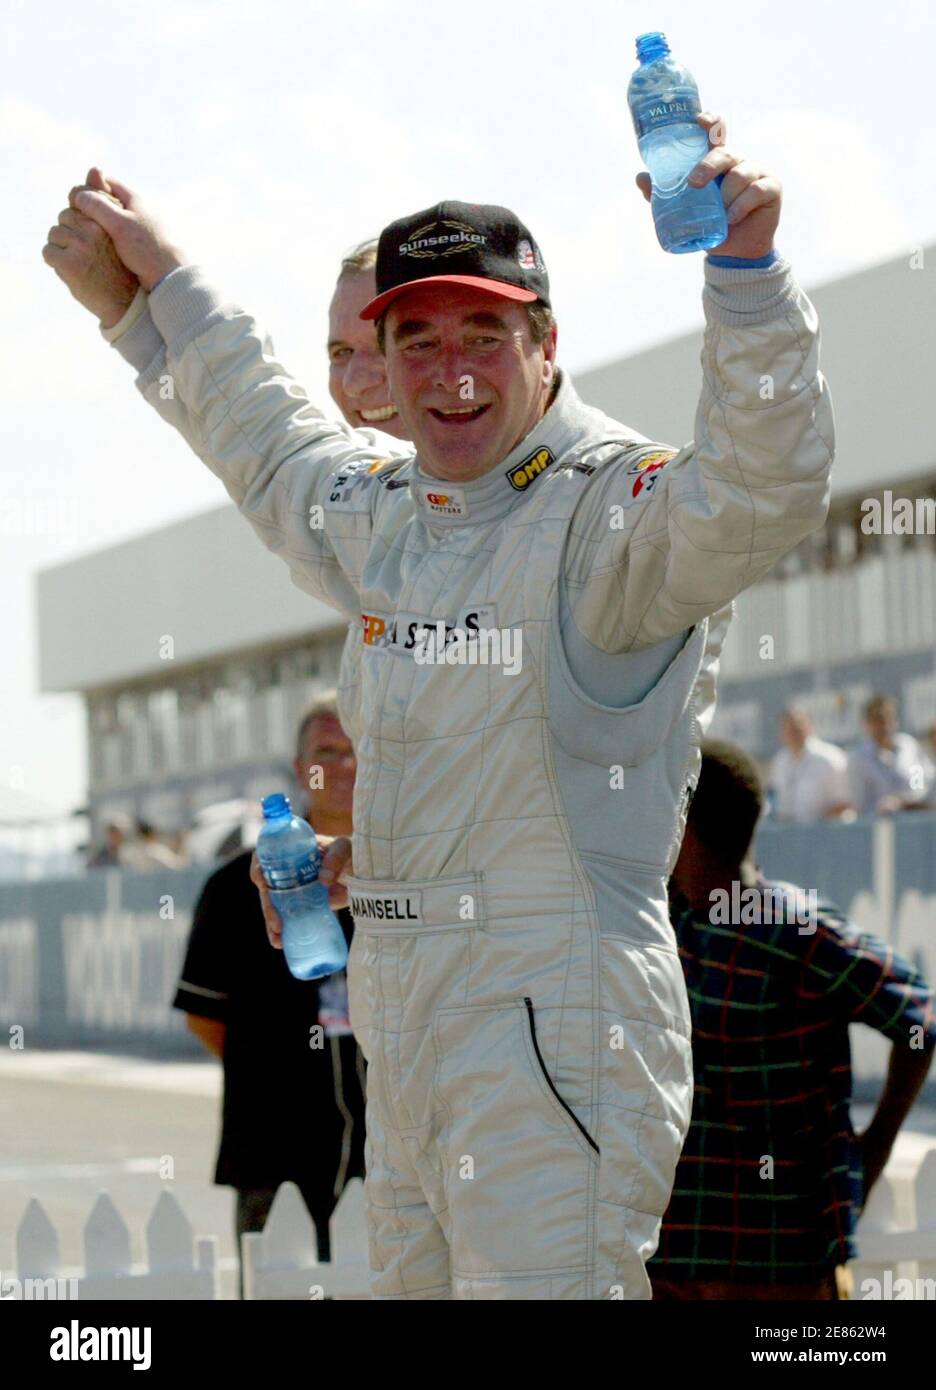 Britains Nigel Mansell celebrates after winning the Grand Prix Master at the Kyalami circuit near Johannesburg, November 13,2005. Mansell, 52, led the 30-lap race from start to finish and held off the challenge of Brazil's Emerson Fittipaldi to win by less than half-a-second. REUTERS Juda Ngwenya Stock Photo